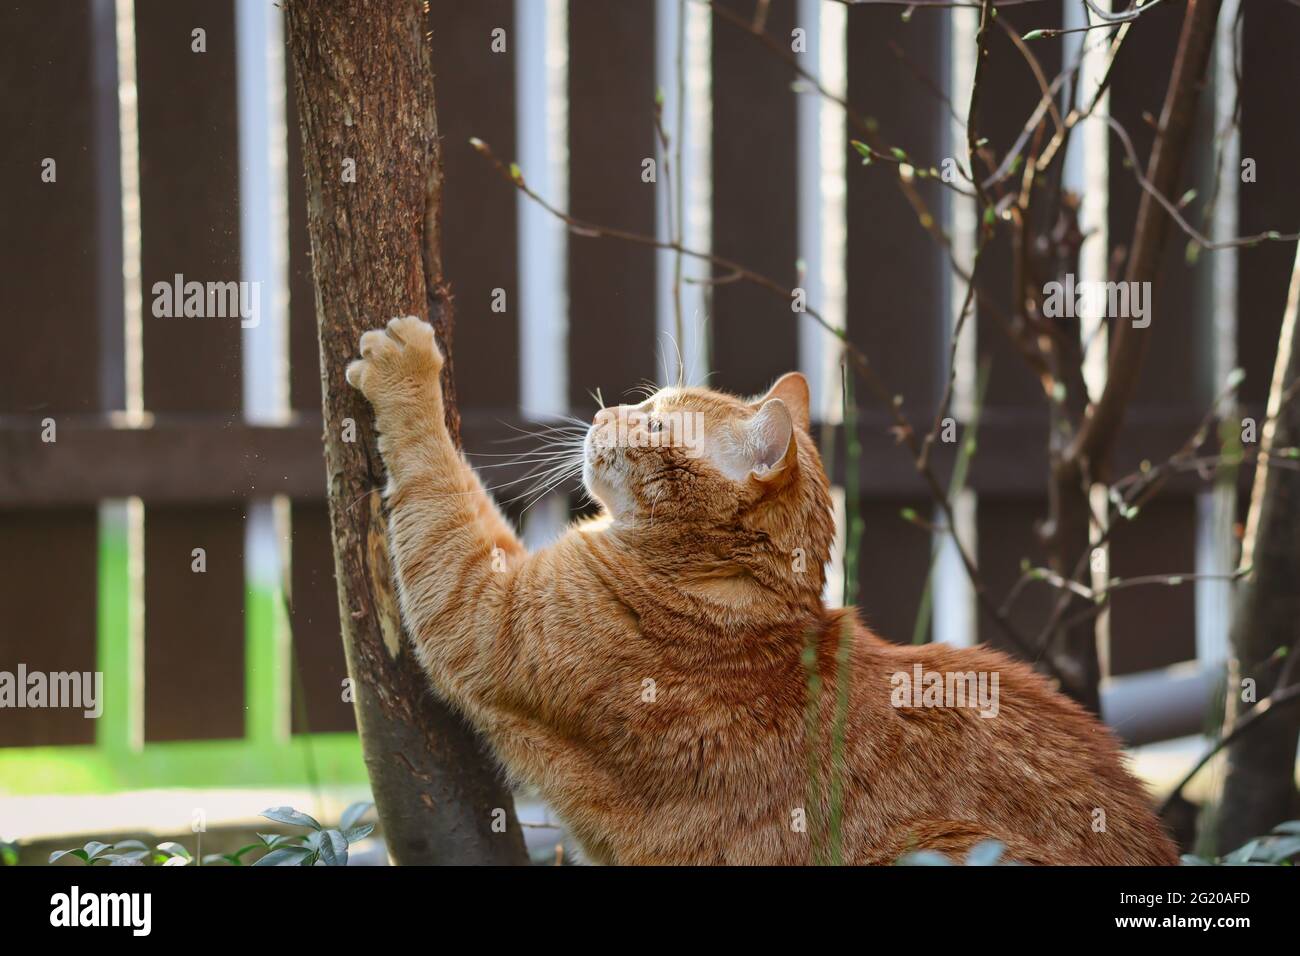 Ginger Tabby Cat Scratches Tree in the Garden. Orange Domestic Animal Outside. Stock Photo